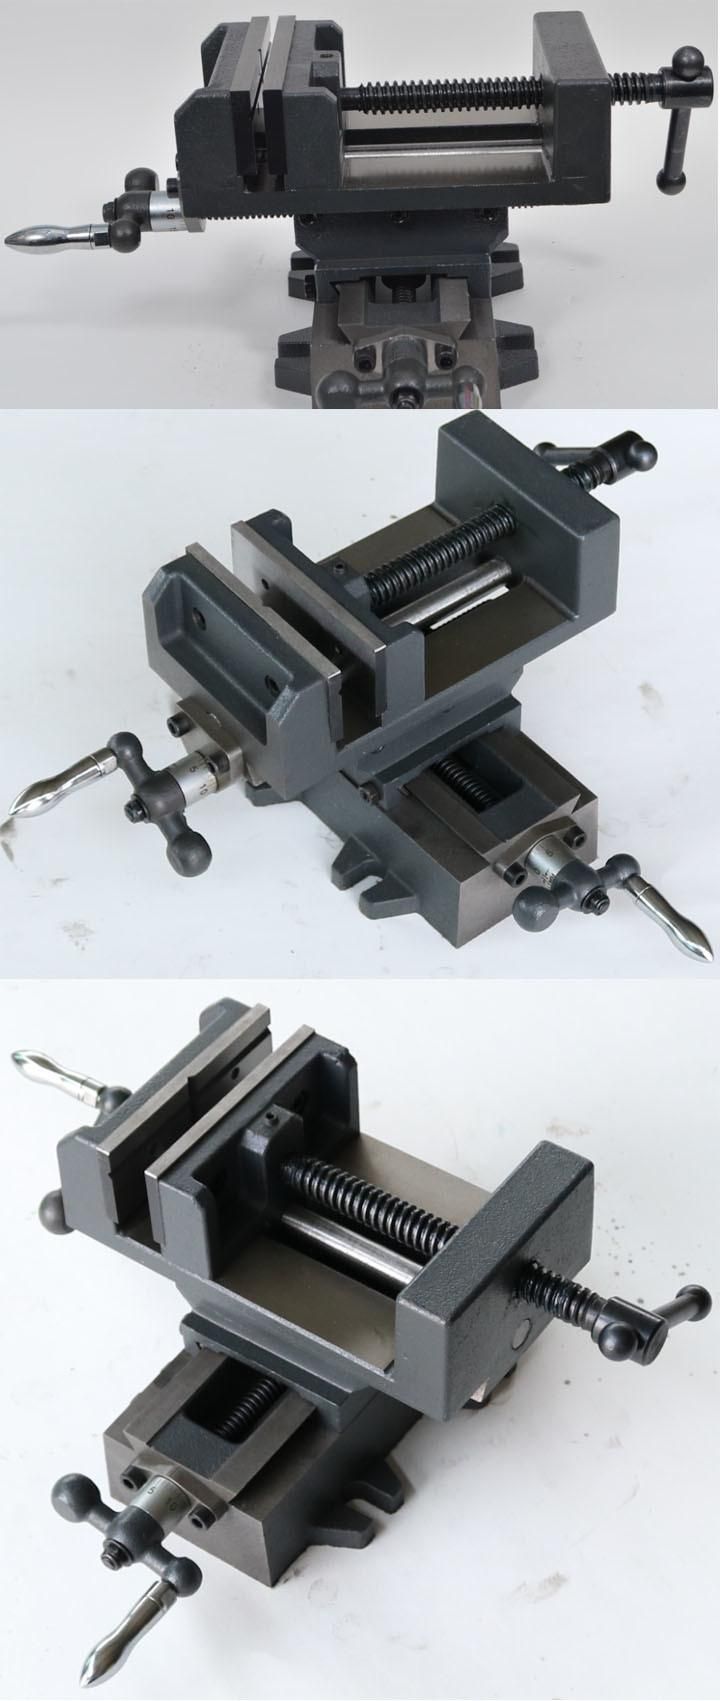 Industrial Drill Press Vise for Drilling Machine